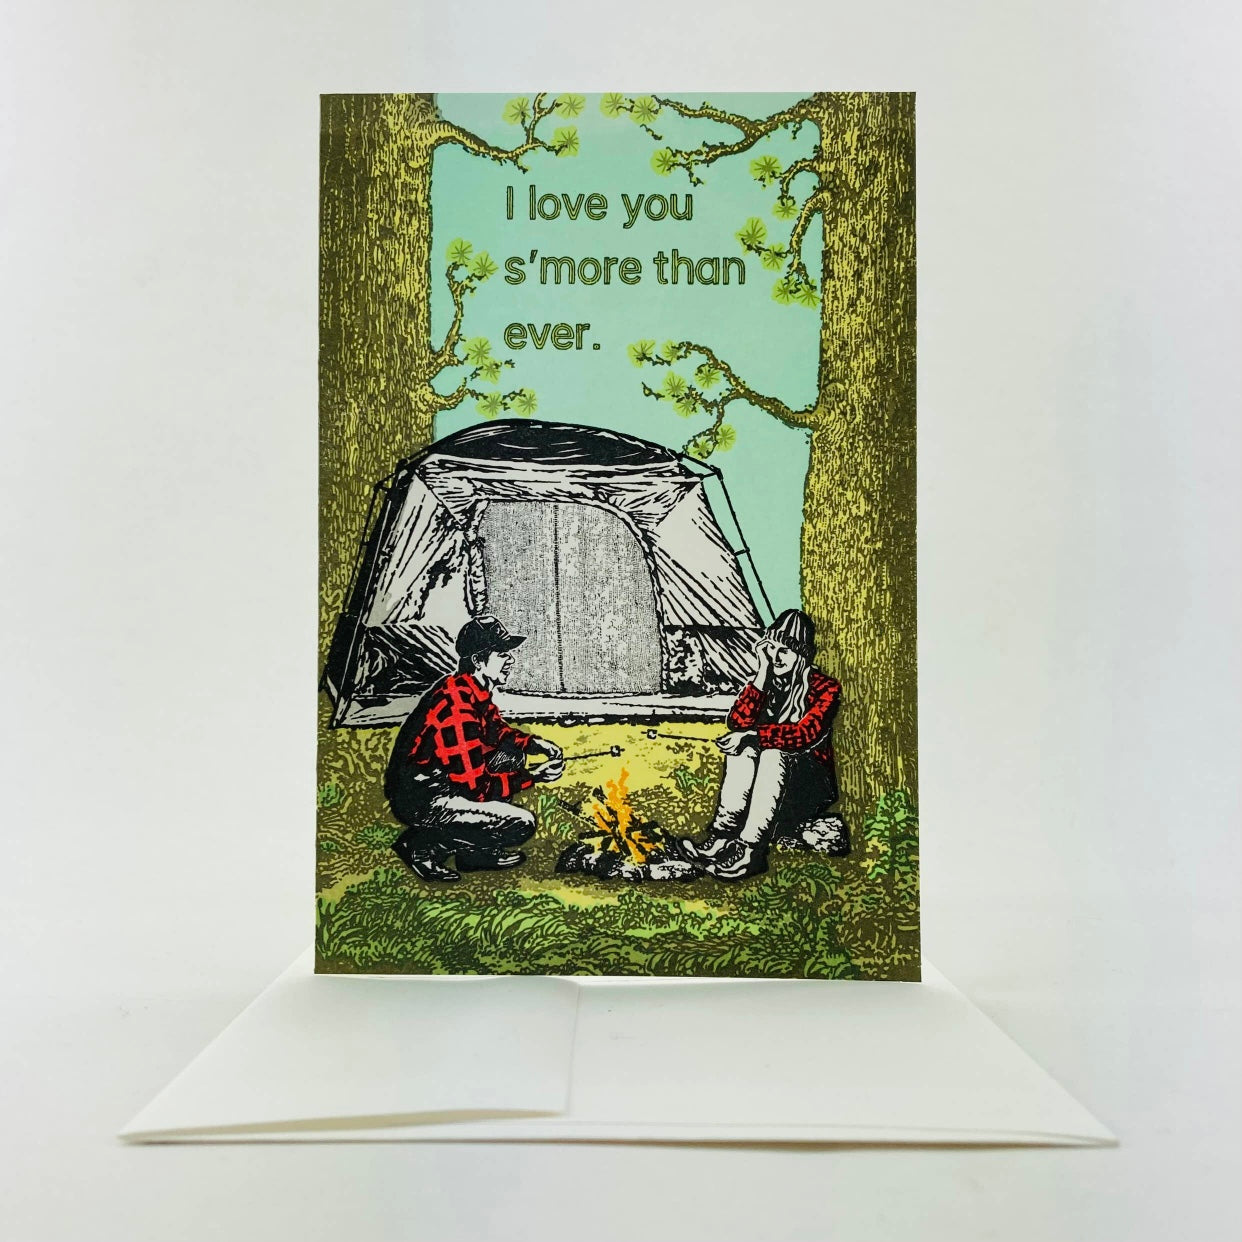 i love you s'more than ever greeting card